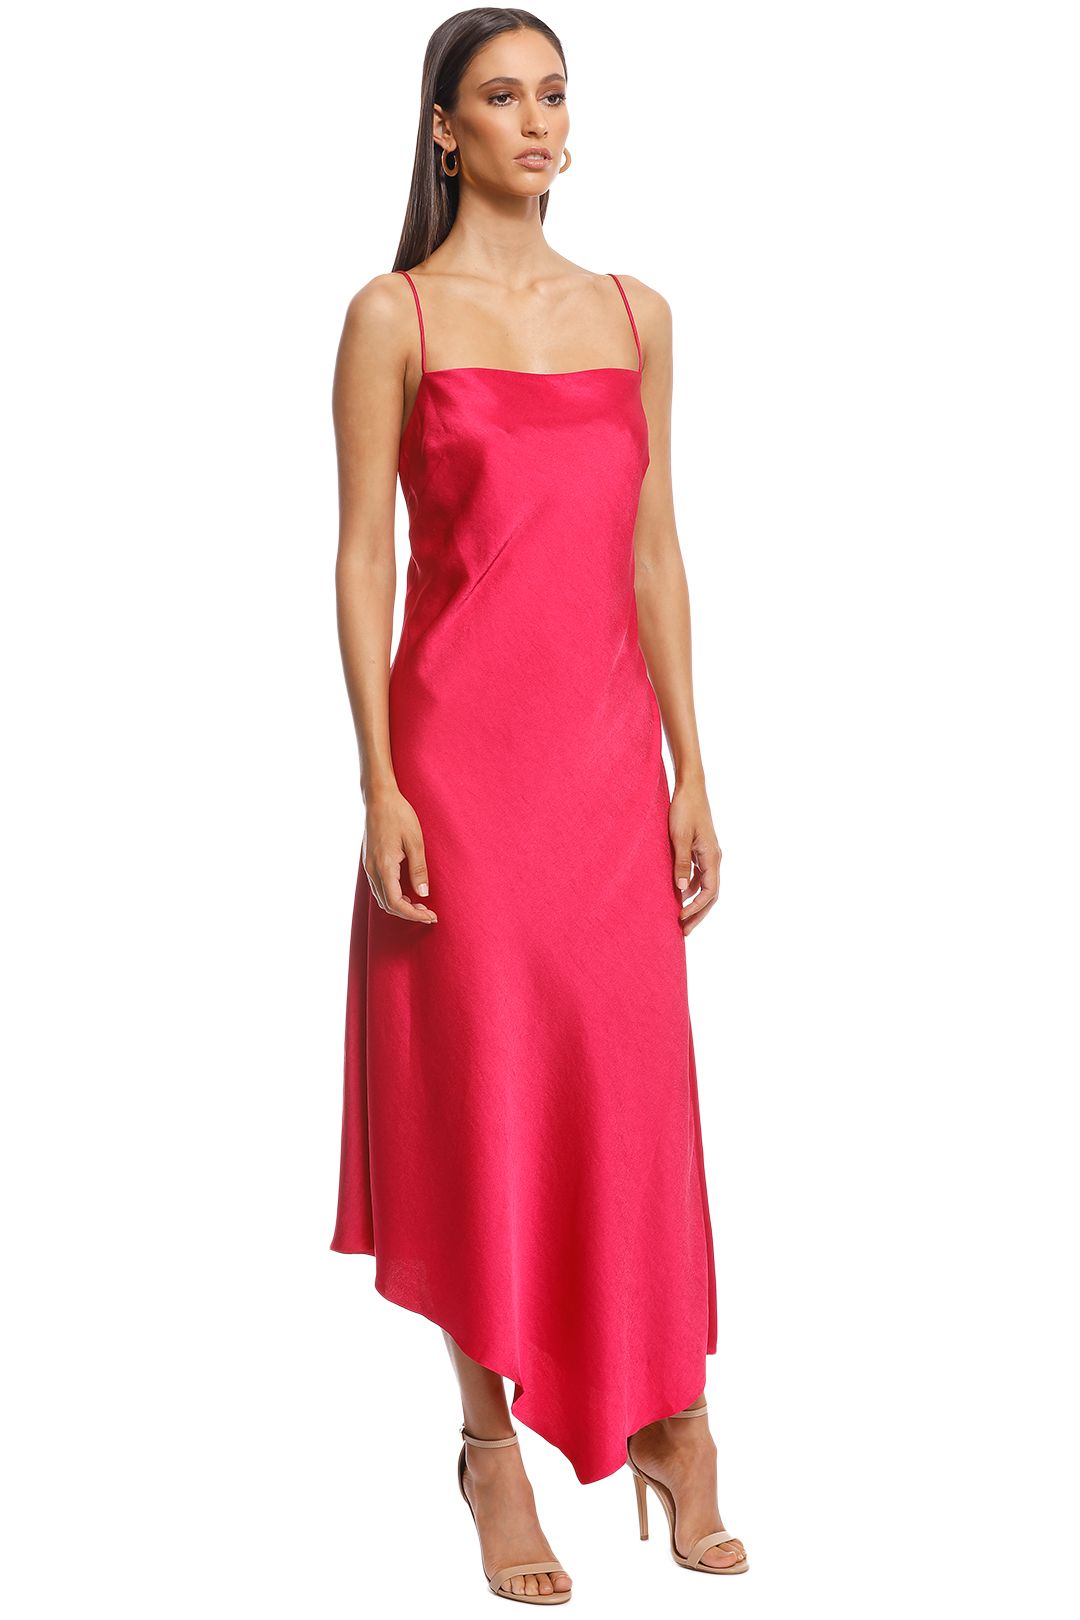 Camilla and Marc - Sirocco Slip Dress - Pink - Side